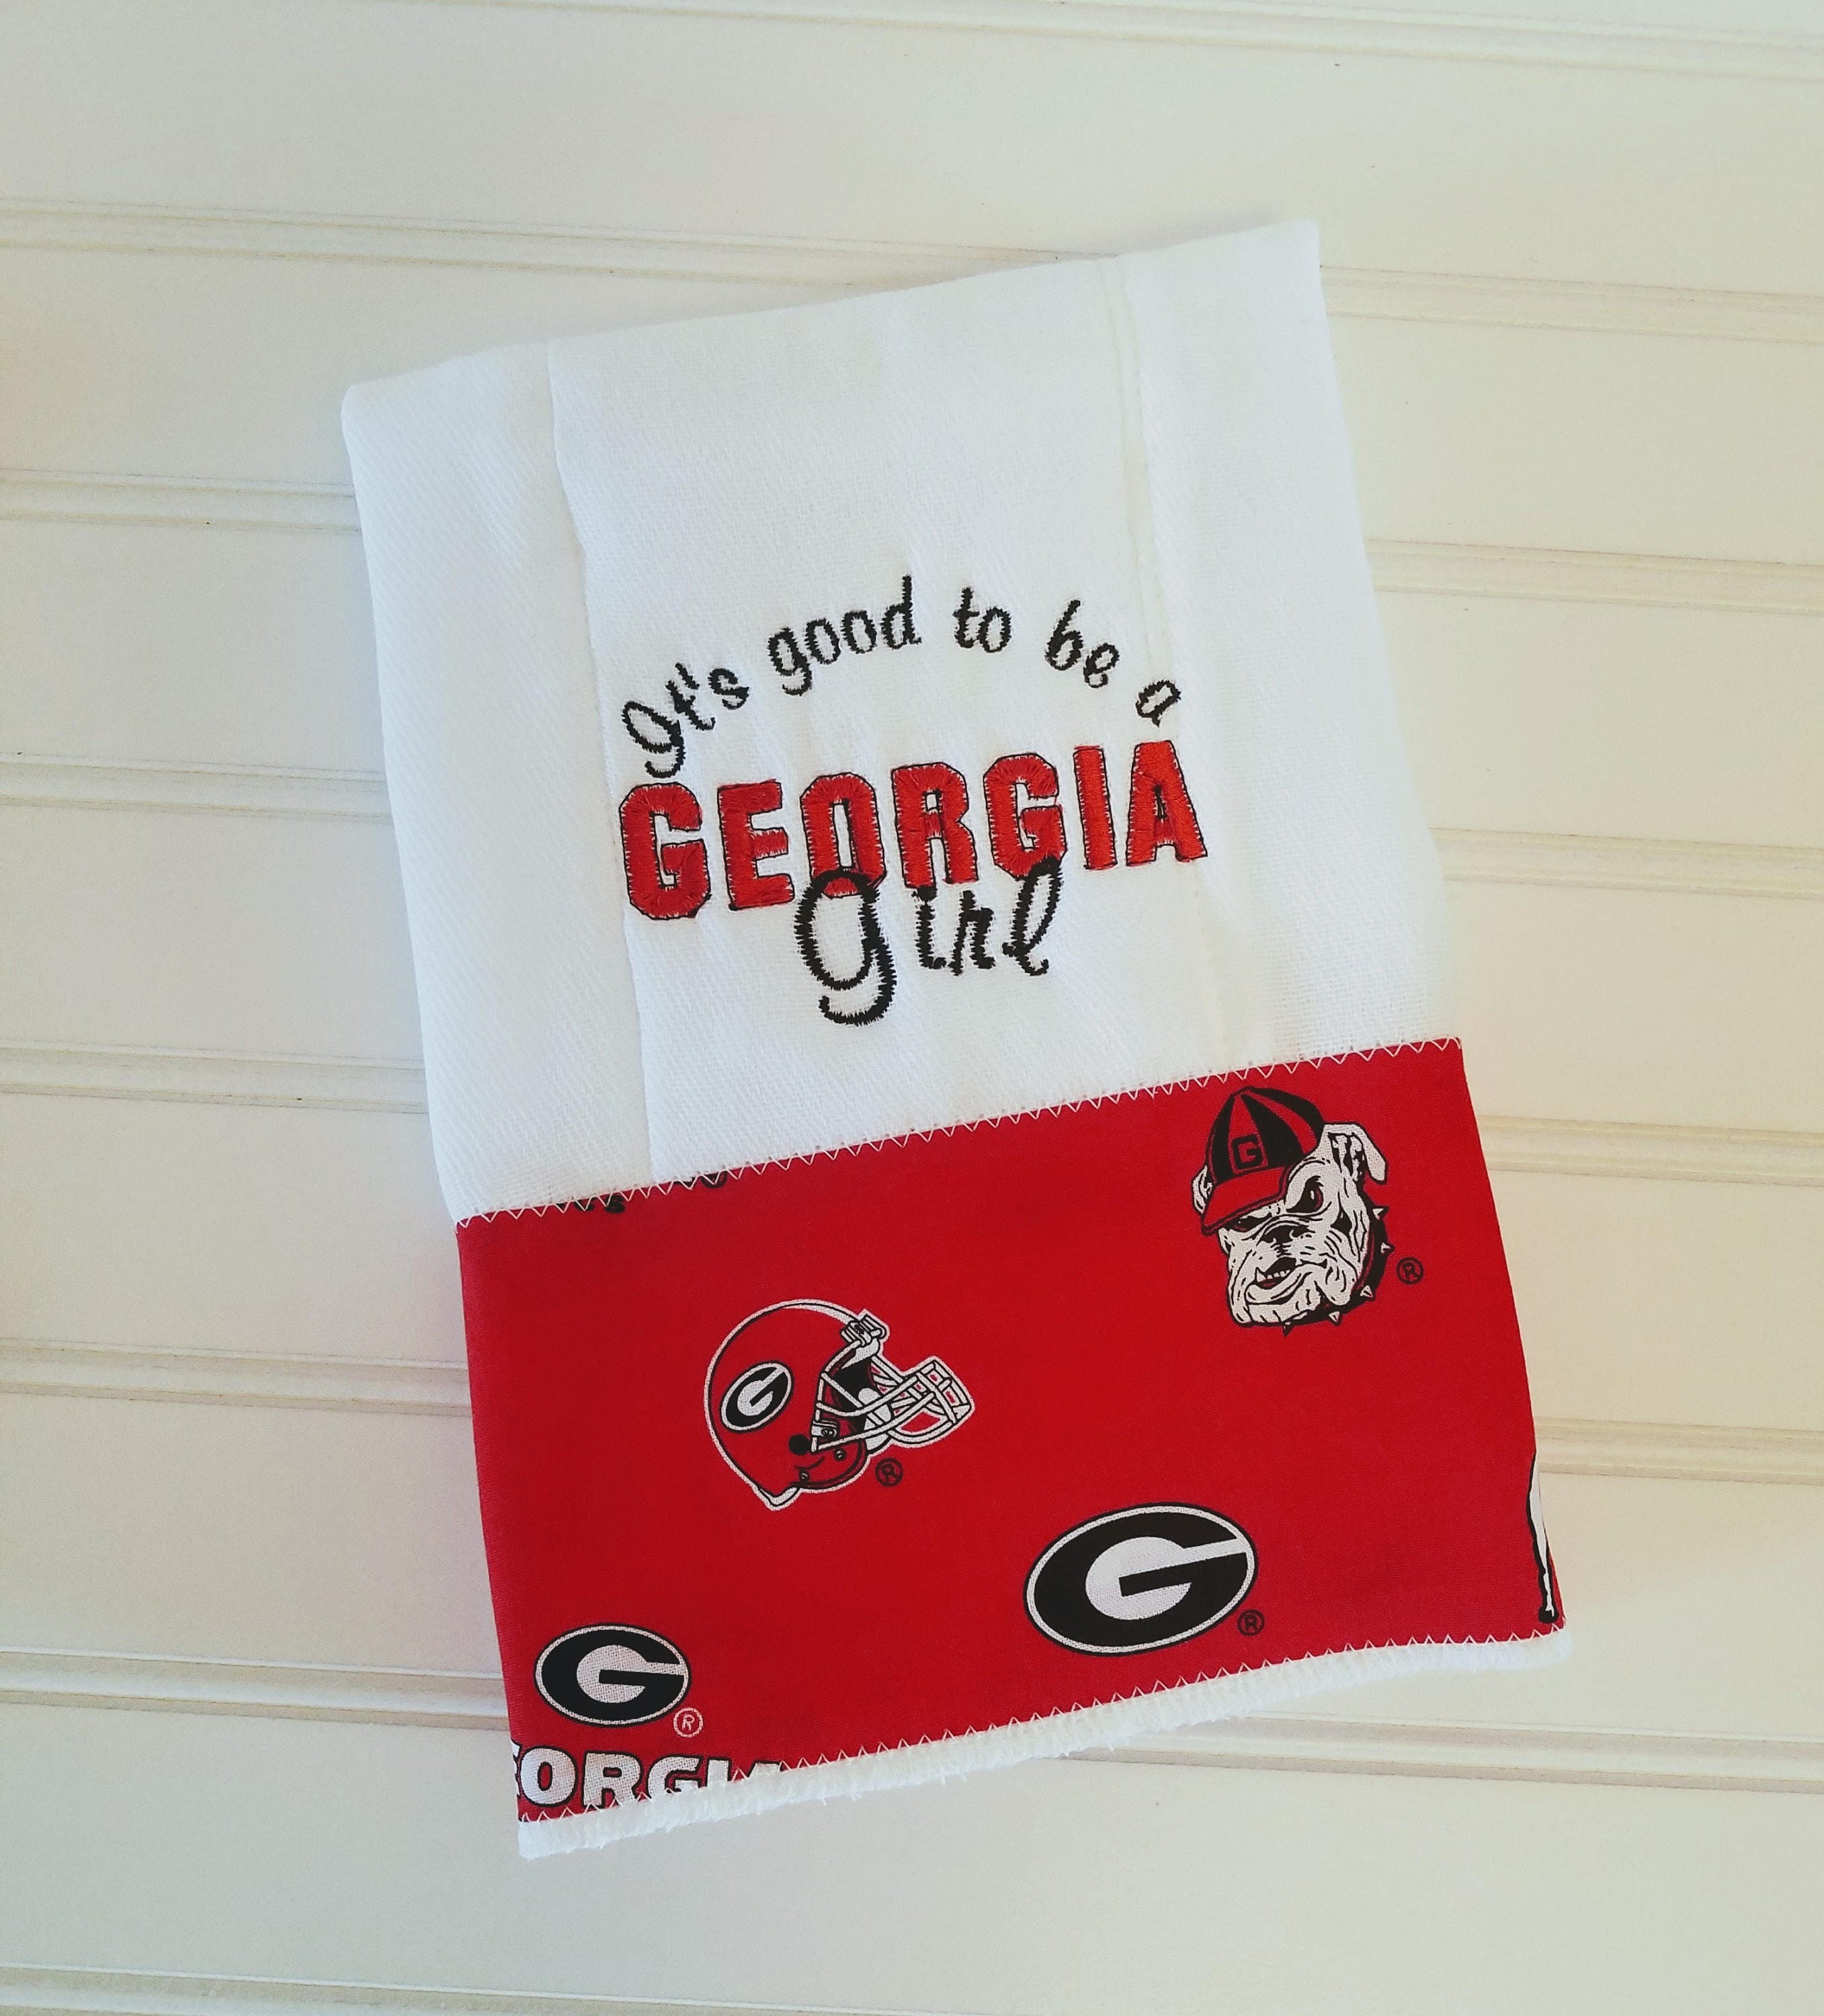 Georgia Shirt, Fly Fish Apparel for a Georgian With Graphic Fly